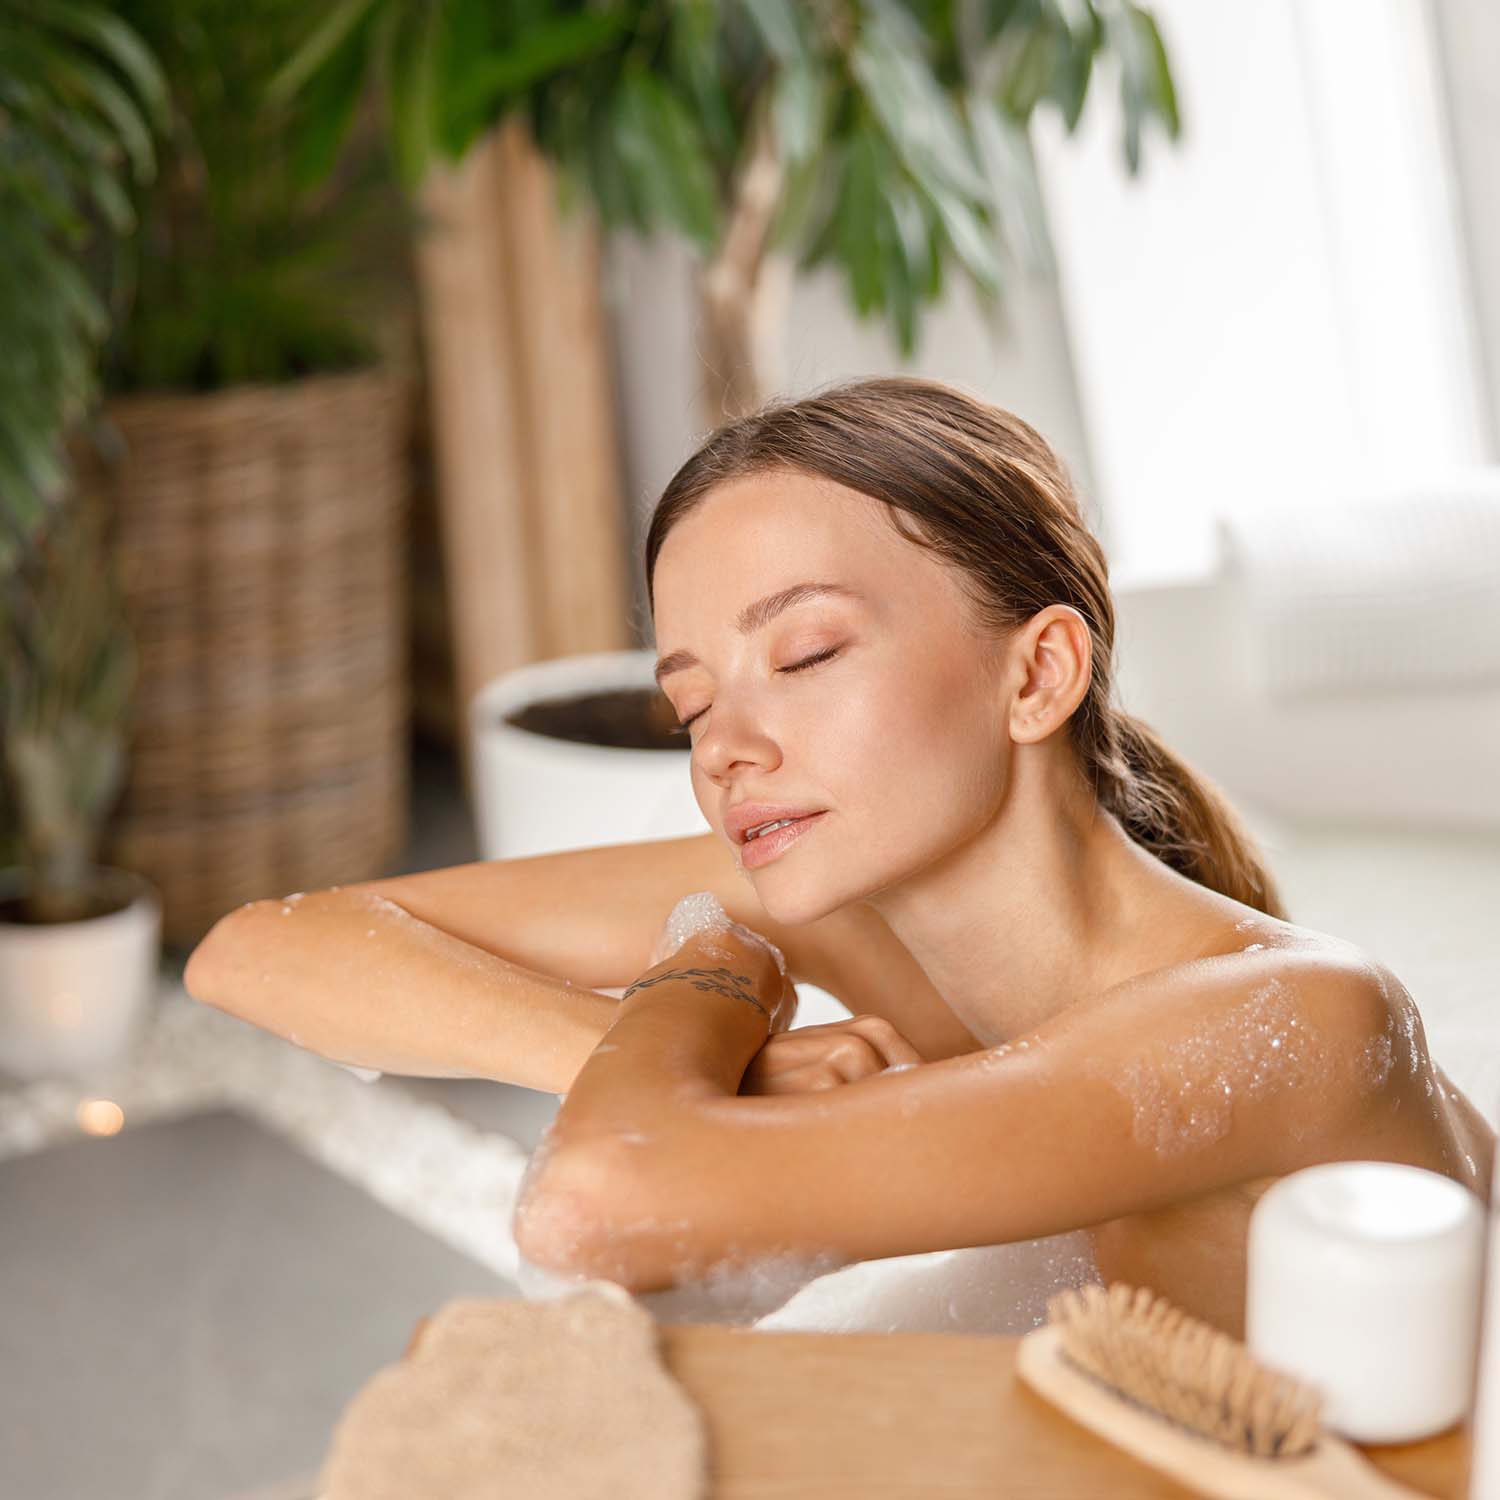 Relaxed young woman leaning on bathtub side while bathing with eyes closed at spa resort. Wellness, beauty and care concept